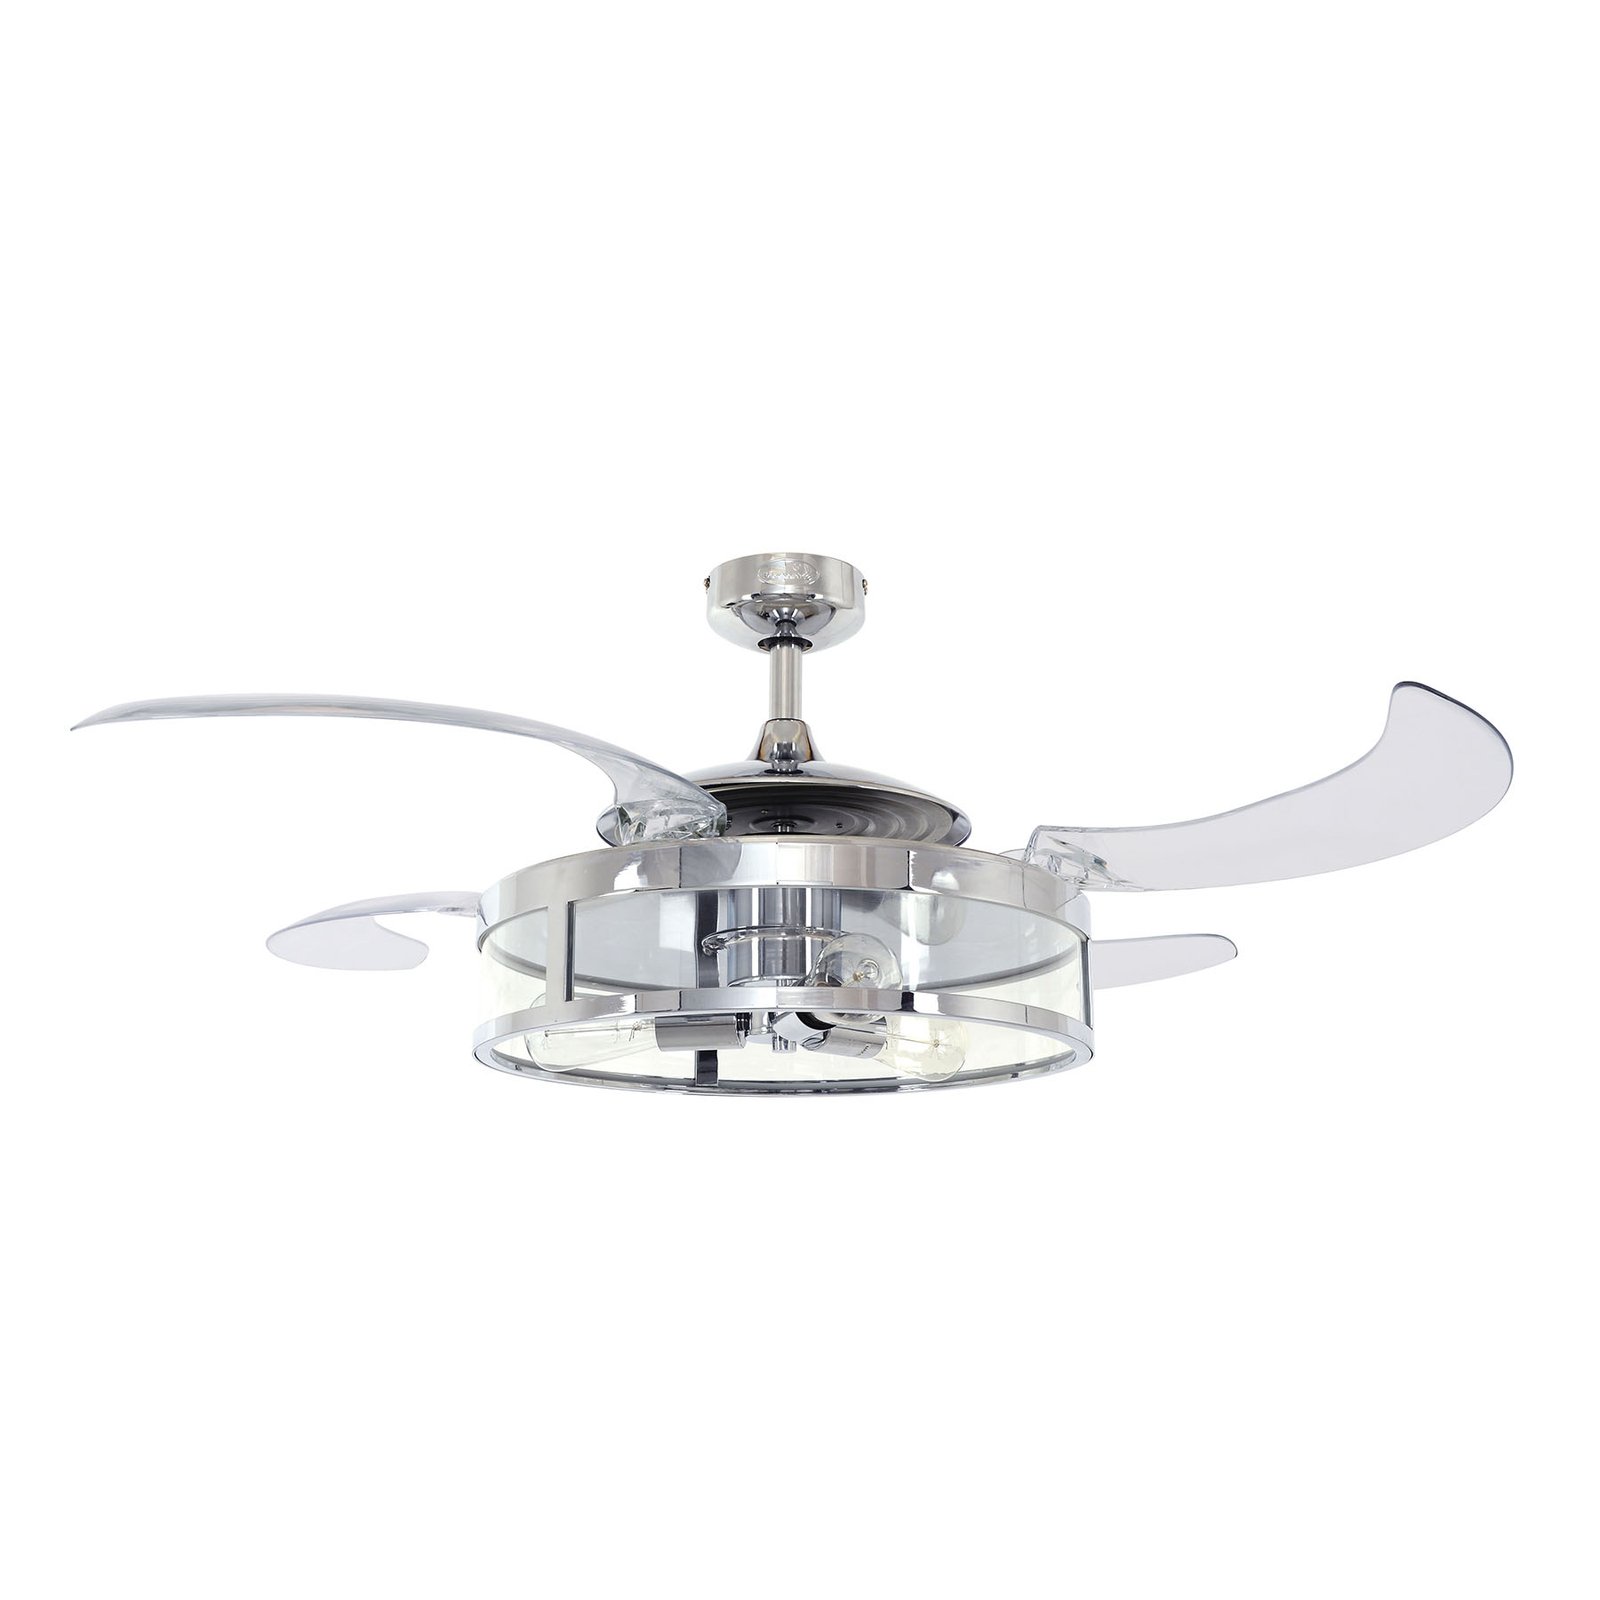 Fanaway Classic ceiling fan with light, chrome